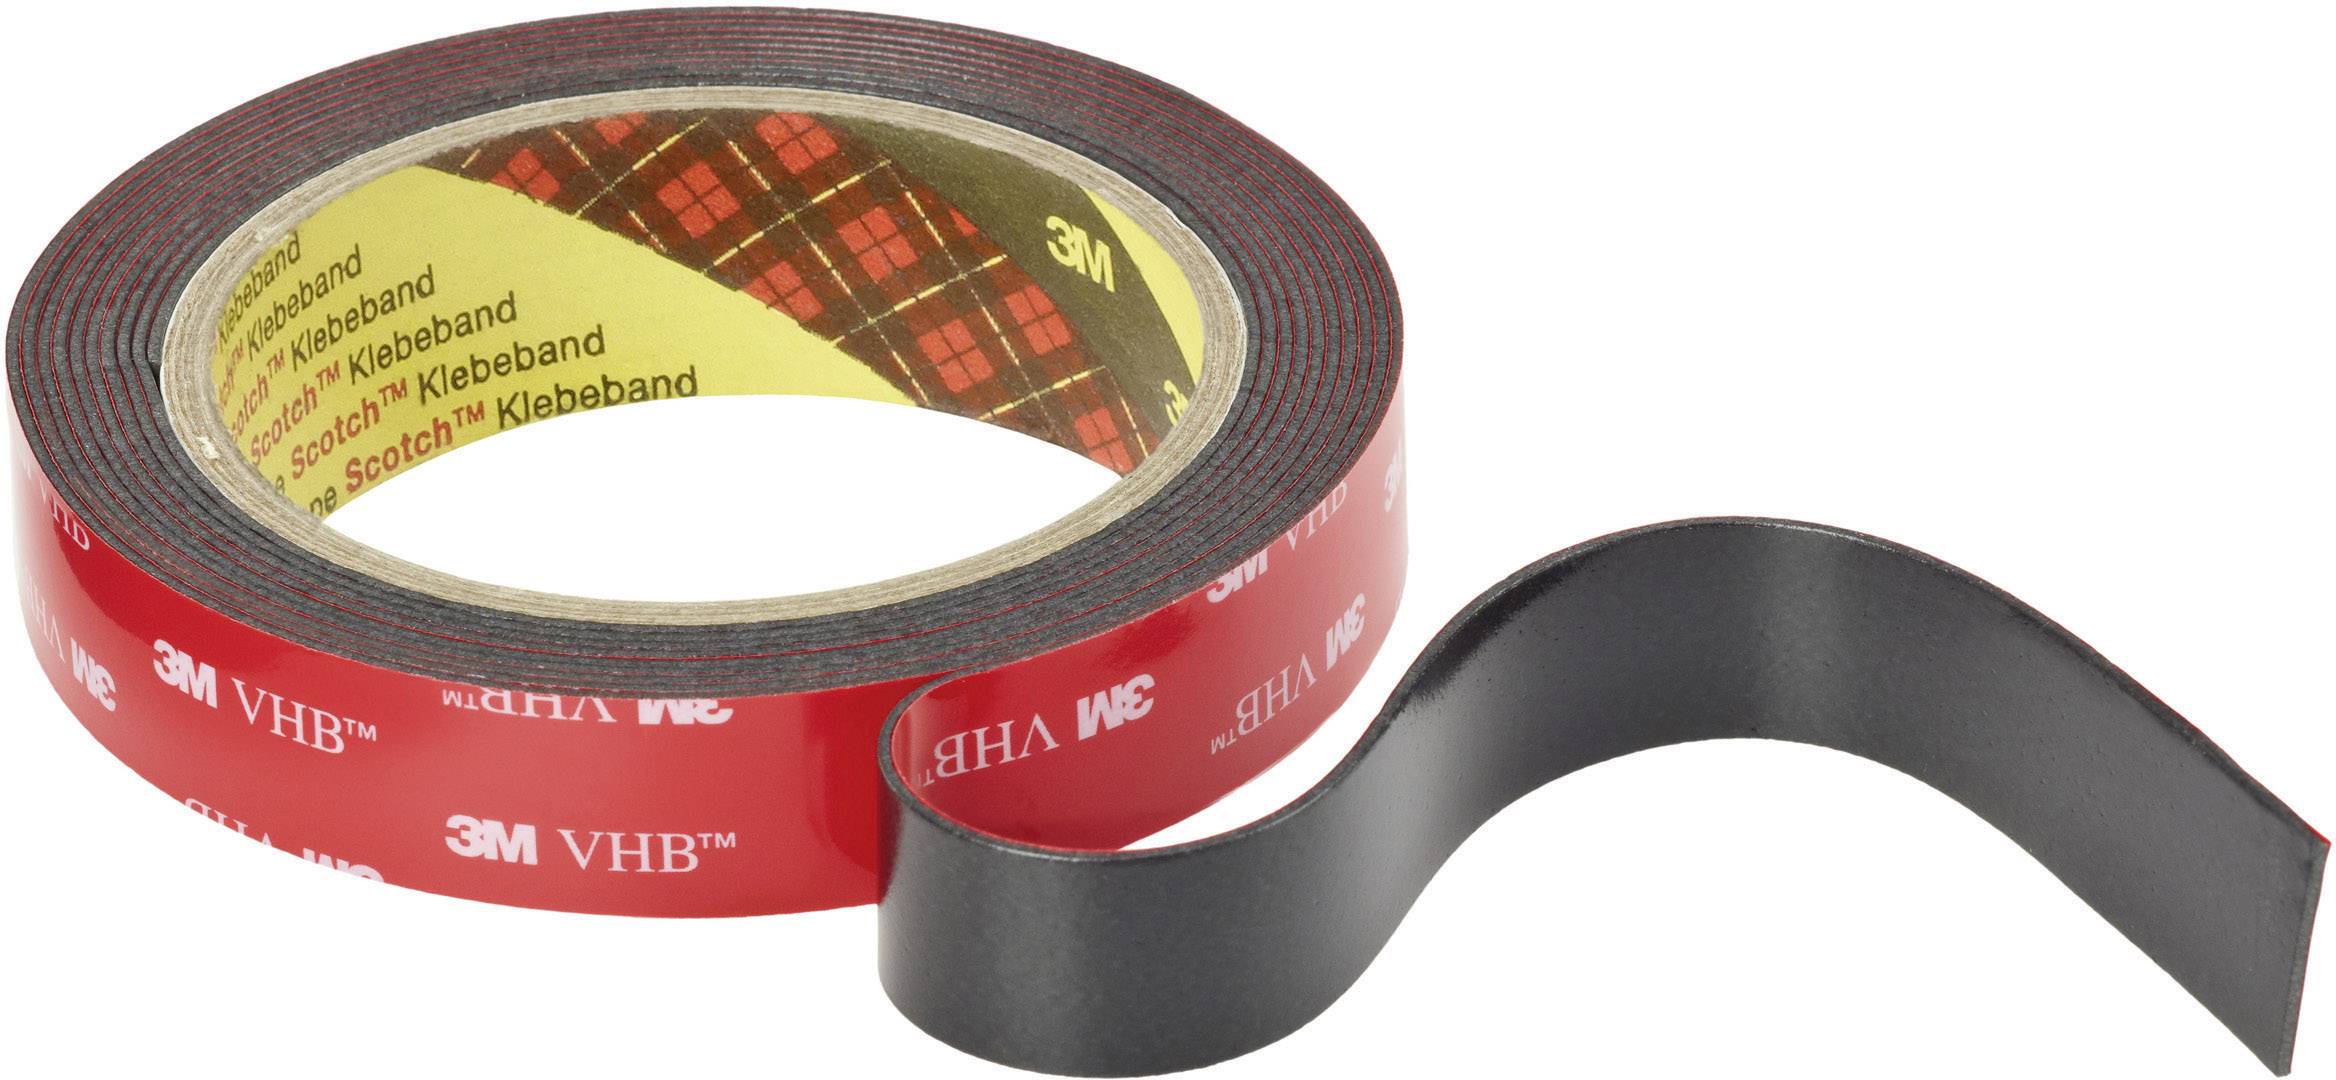 double sided adhesive tape for mirror